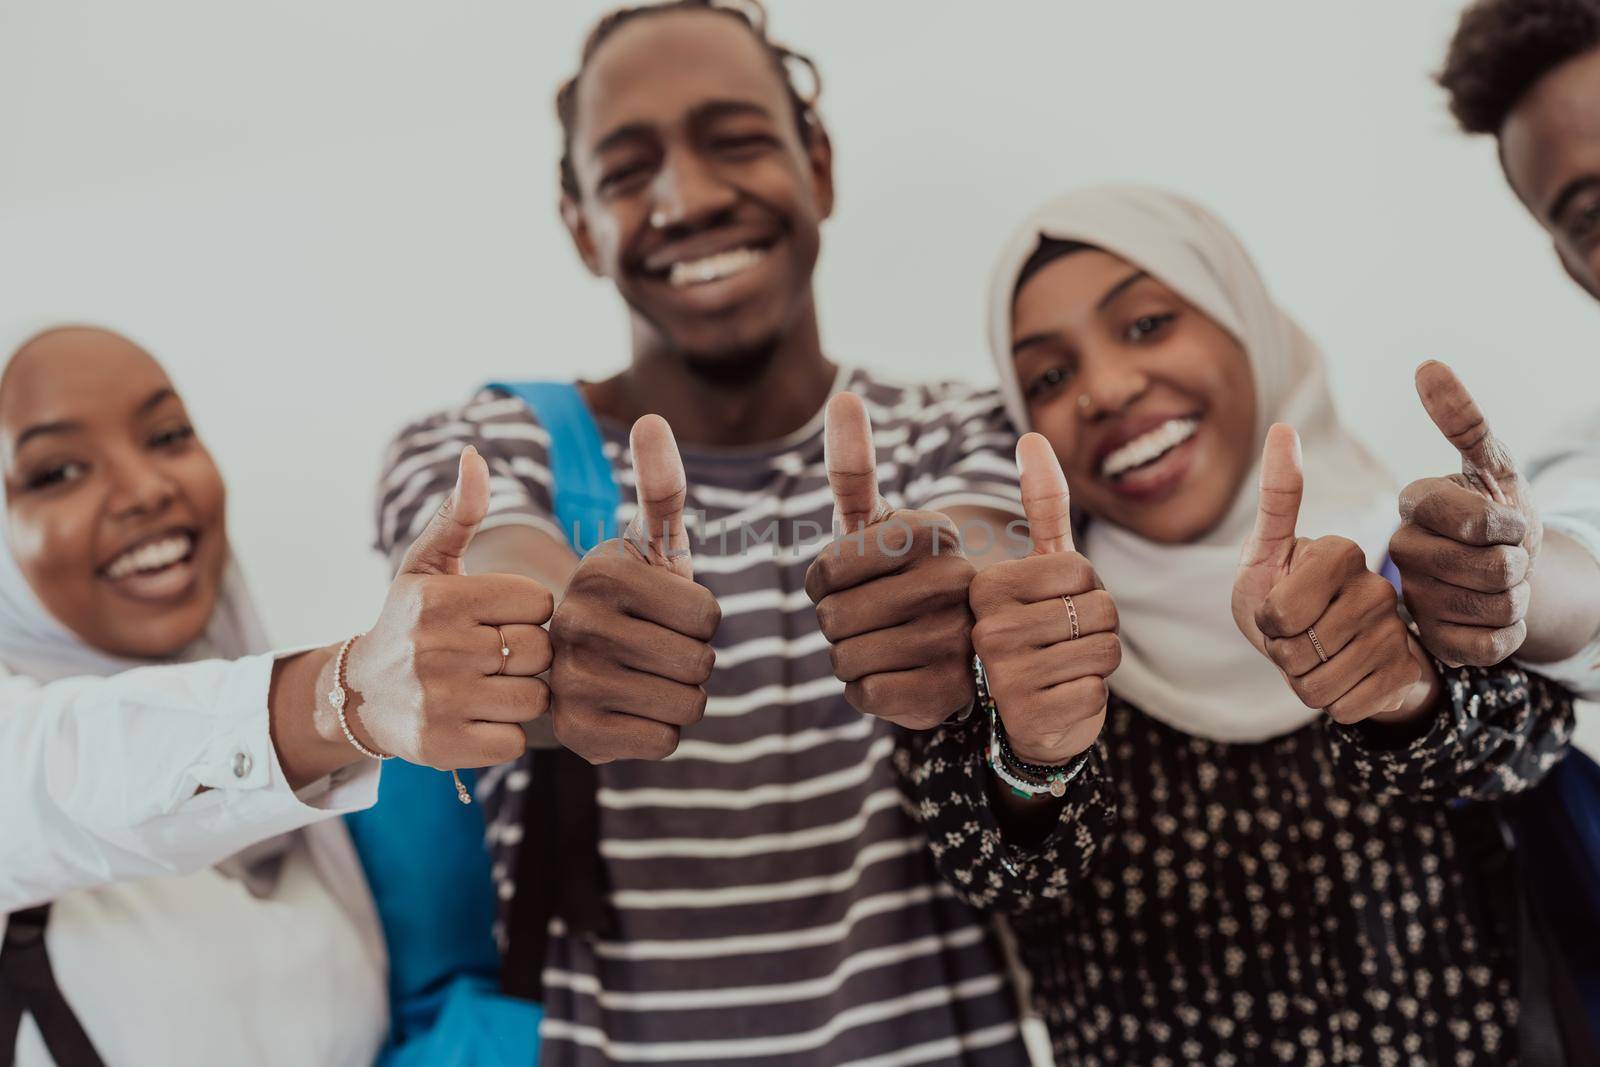 Group portrait of happy African students standing together against a white background and showing ok sign thumbs up girls wearing traditional Sudan Muslim hijab fashion. High-quality photo